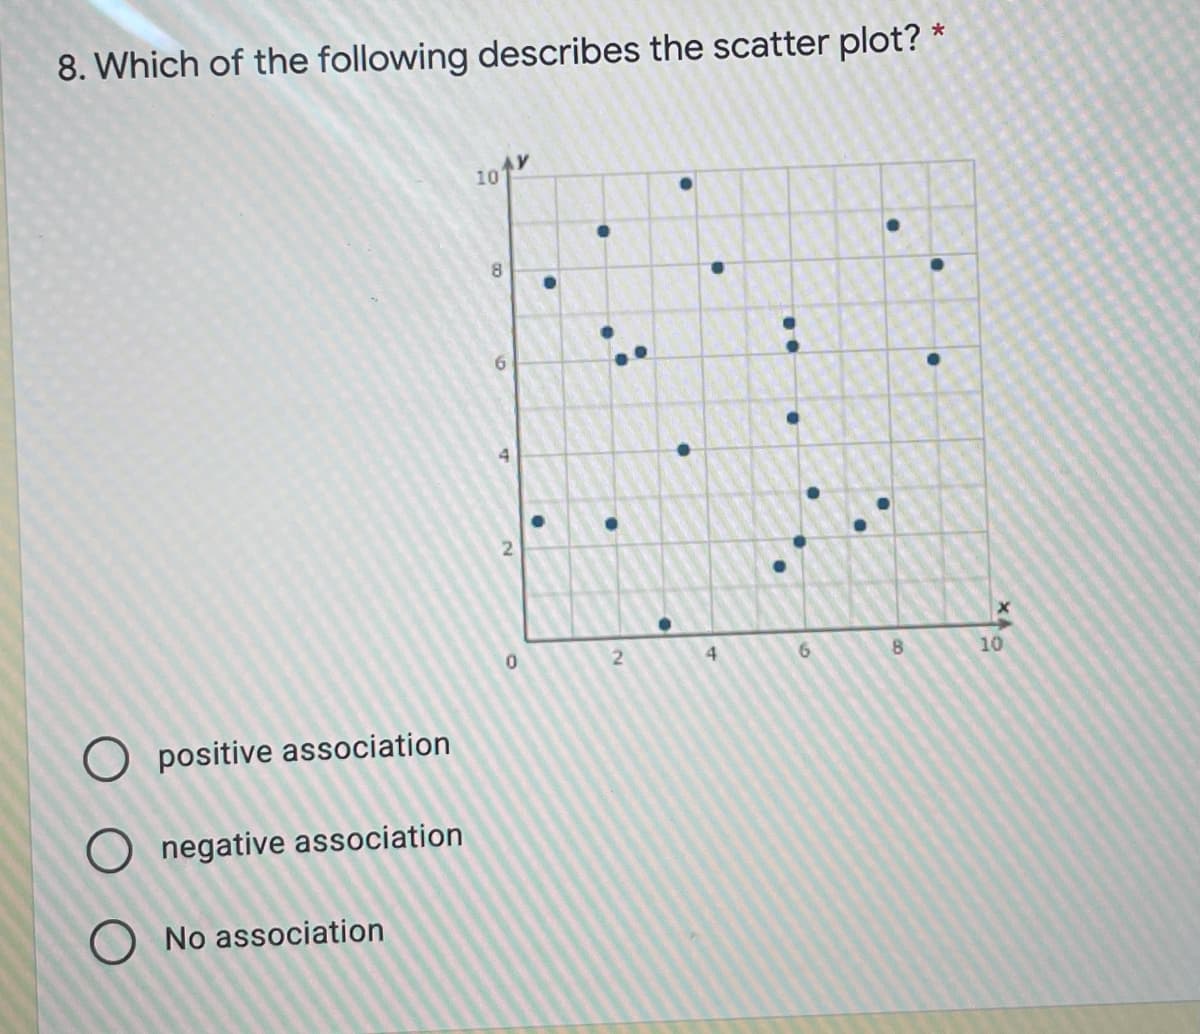 8. Which of the following describes the scatter plot? *
10
8.
4
8.
10
O positive association
O negative association
O No association
..
6.
2.
